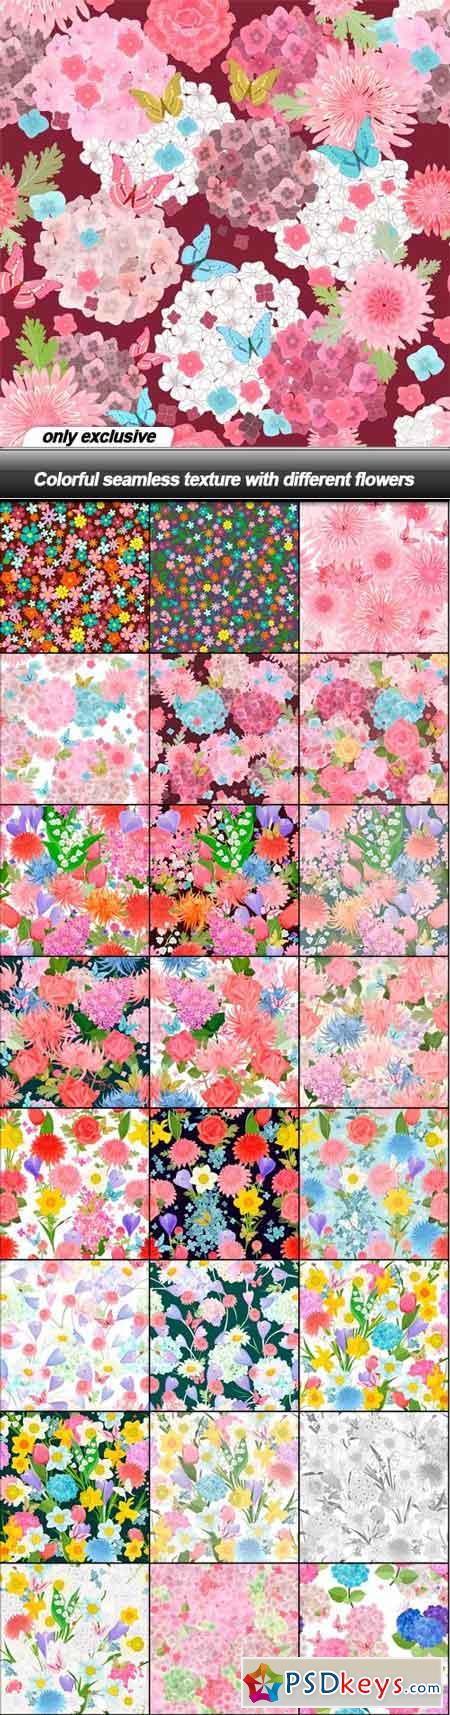 Colorful seamless texture with different flowers - 25 EPS